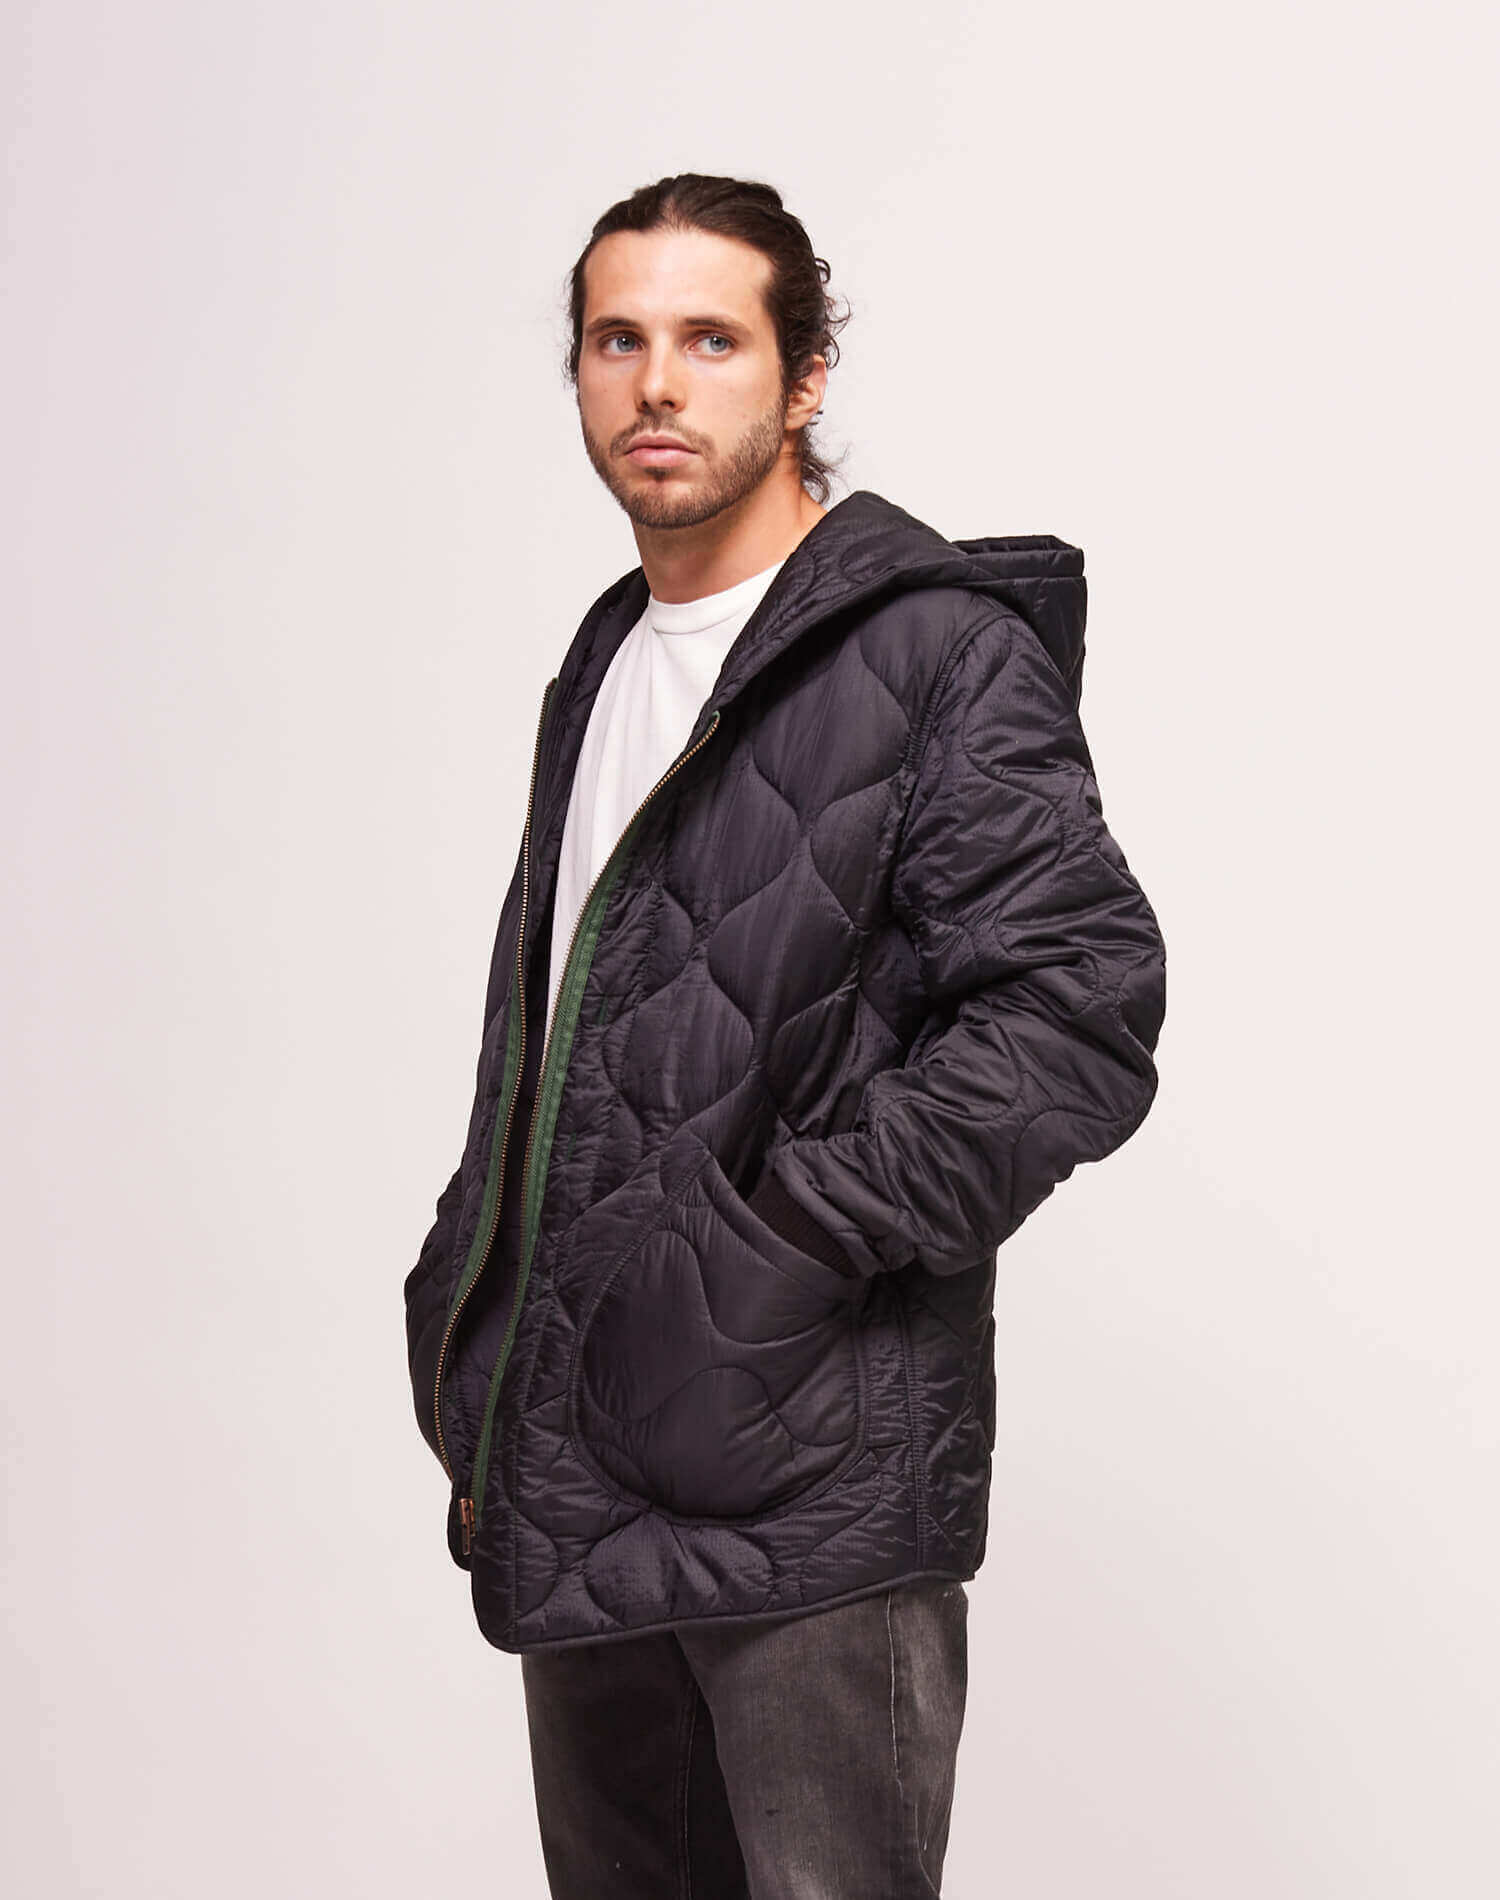 HOODIE QUILTED JACKET Lightweight padded hoodie jacket. Front zip closure. Two frontal pockets. Hollywood Trading Company printed on the back. 100% Polyester HTC LOS ANGELES